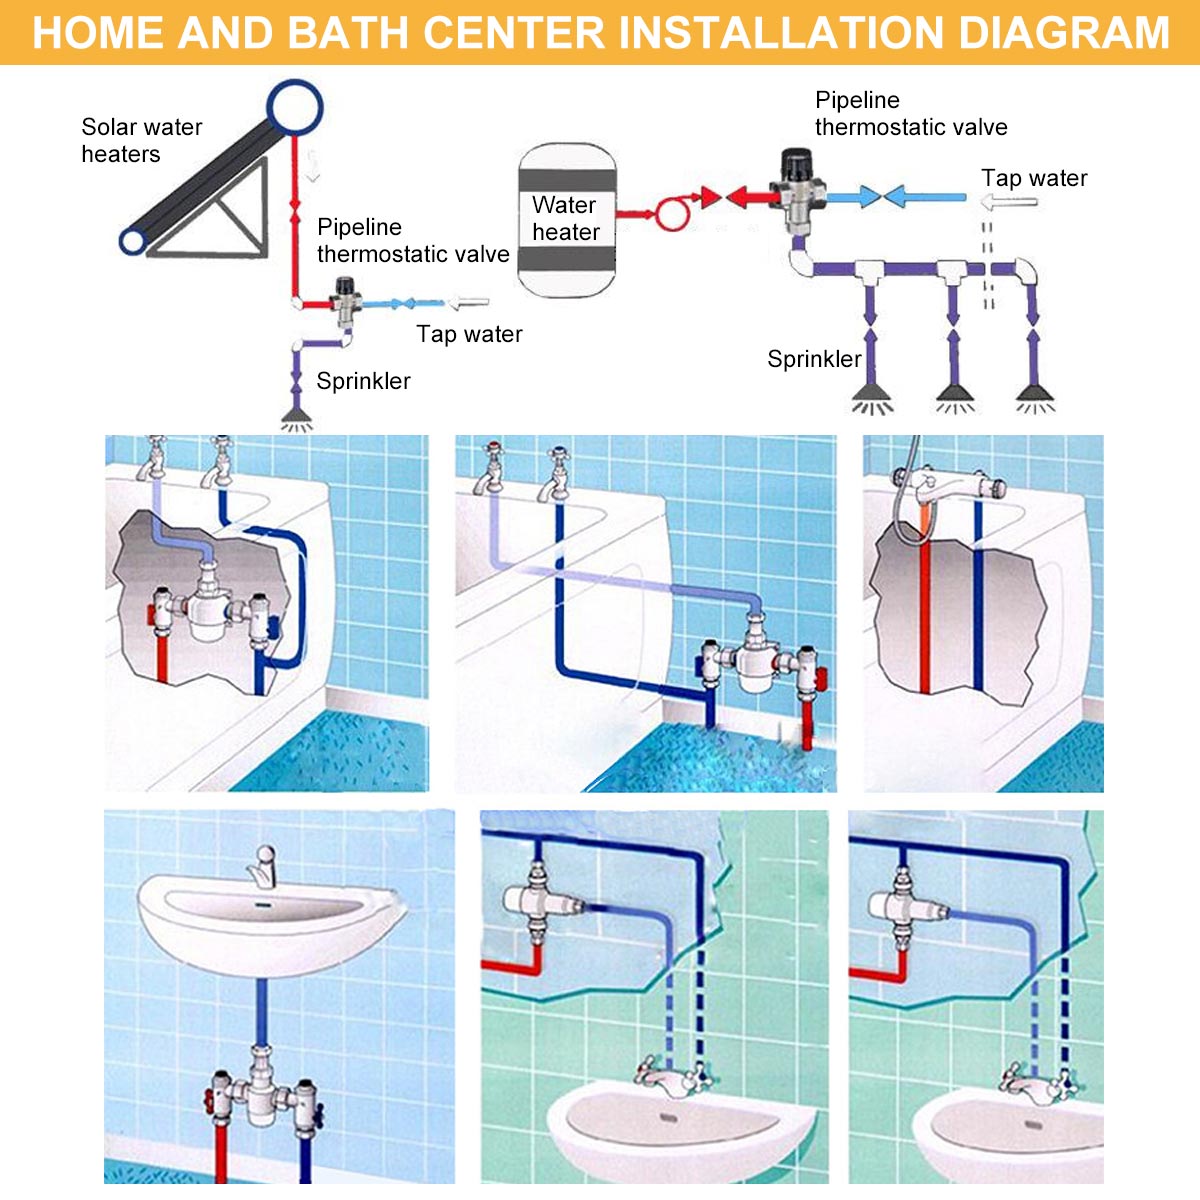 NEW Bathroom Shower Faucet Brass Thermostatic Mixer Valve Static Pipe Thermostat Faucets Water Temperature Control Bidet Shower